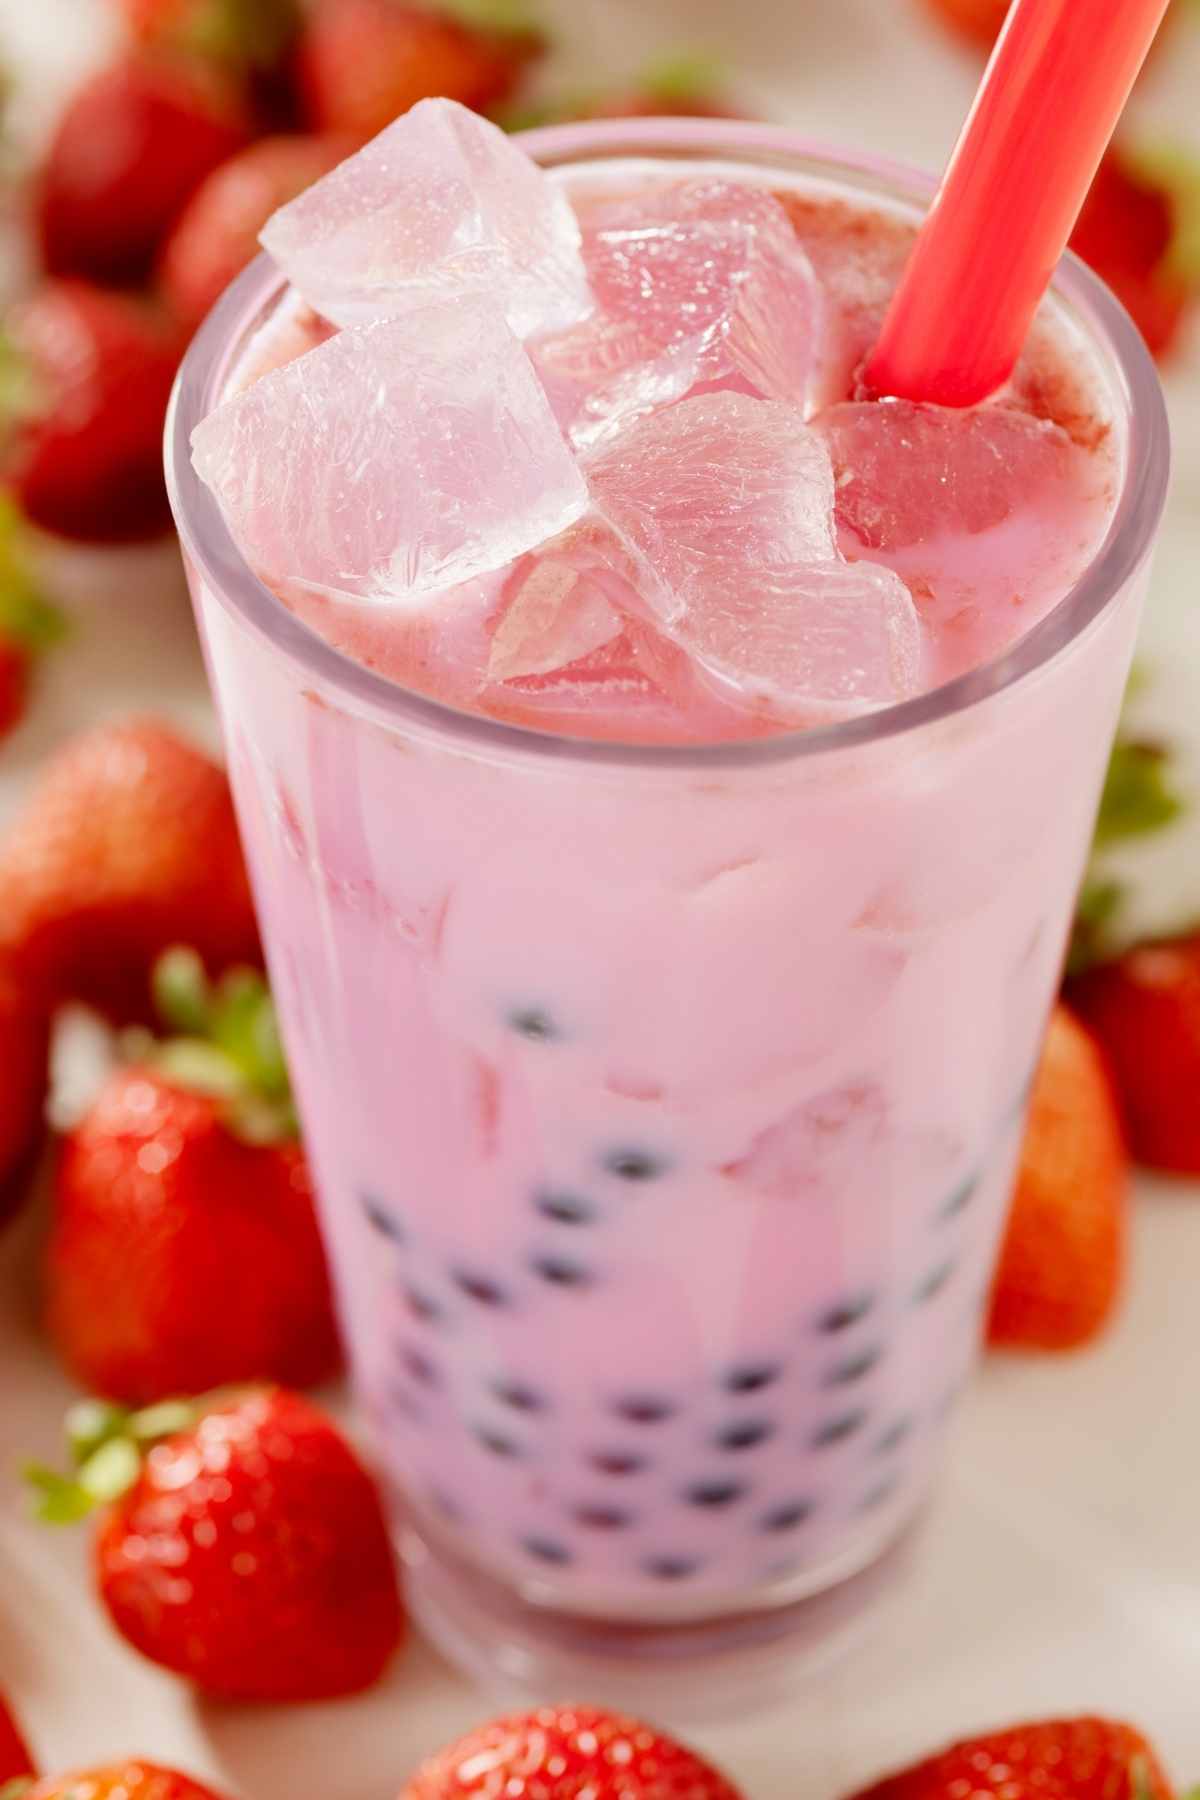 This easy recipe results in a delicious and flavorful drink or dessert your family will love. Whether you enjoy it after dinner or first thing as a fruity breakfast snack in summer, this Strawberry Boba will soon become part of your favorite treat.